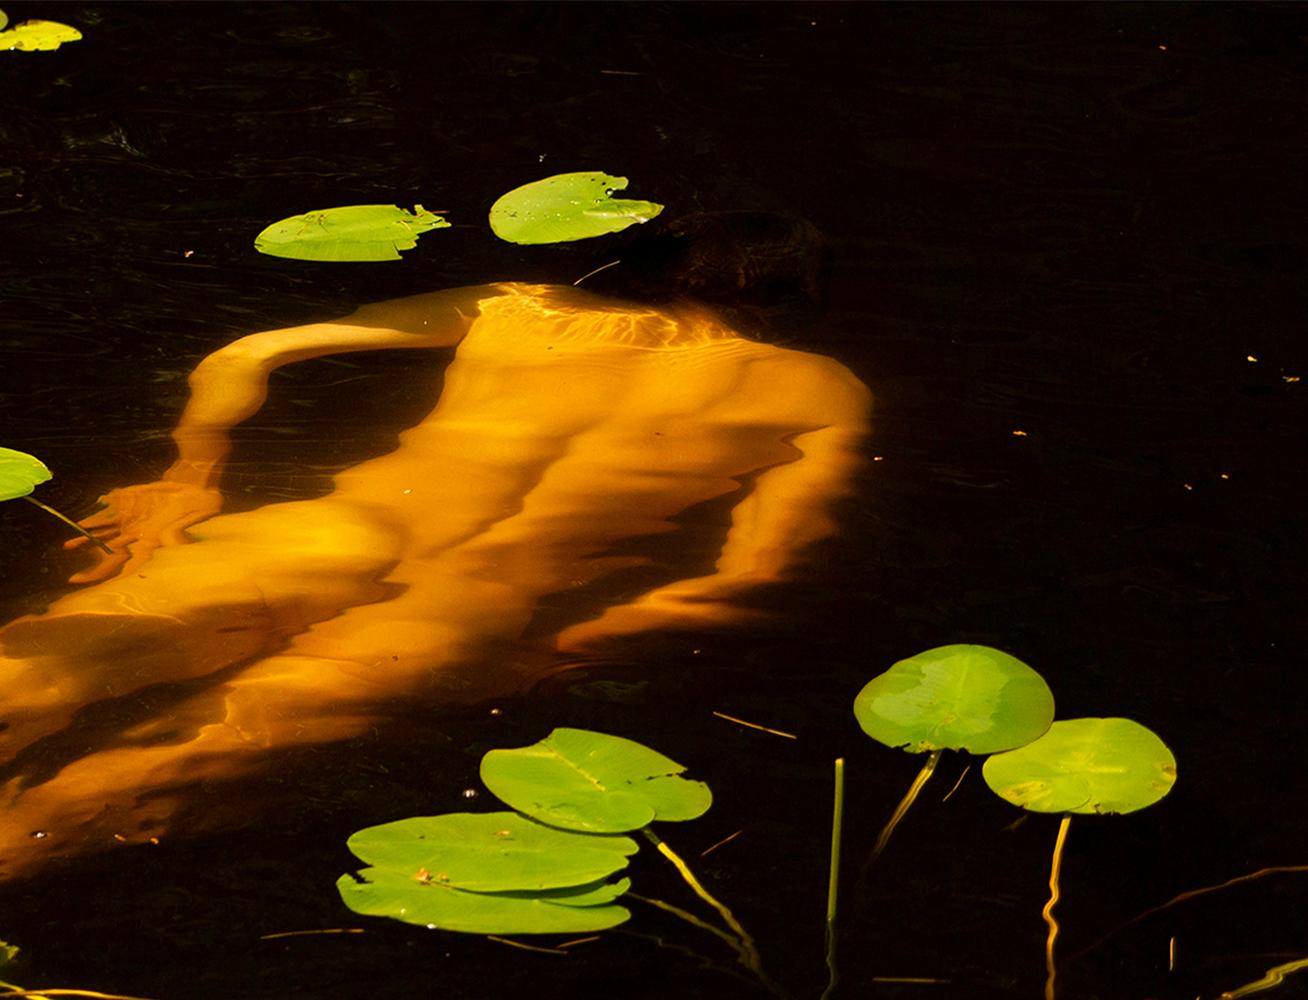 Water Lilies, 2023 by Ricky Cohete
From the series Water Lilies
Color Archival Pigment print
Image size: 24 in. H x 36 in. W
Edition of 10
Unframed


_________________________
Ricky Cohete was born in a coastal city in Ecuador, but mainly, grew up